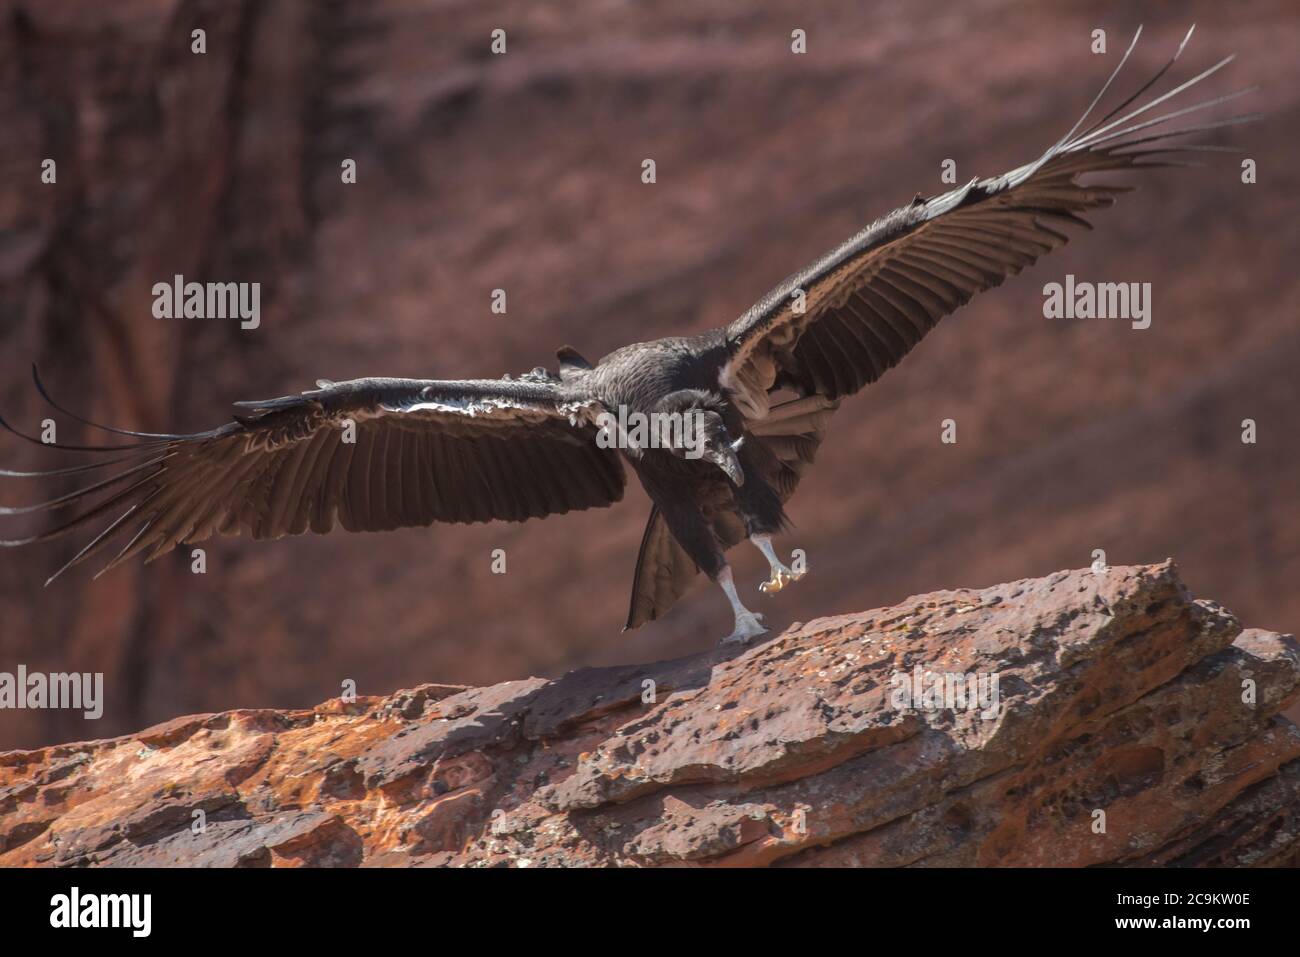 A California condor (Gymnogyps californianus)) coming in for the landing. This fledgling is the 1000th condor hatched in the conservation effort. Stock Photo